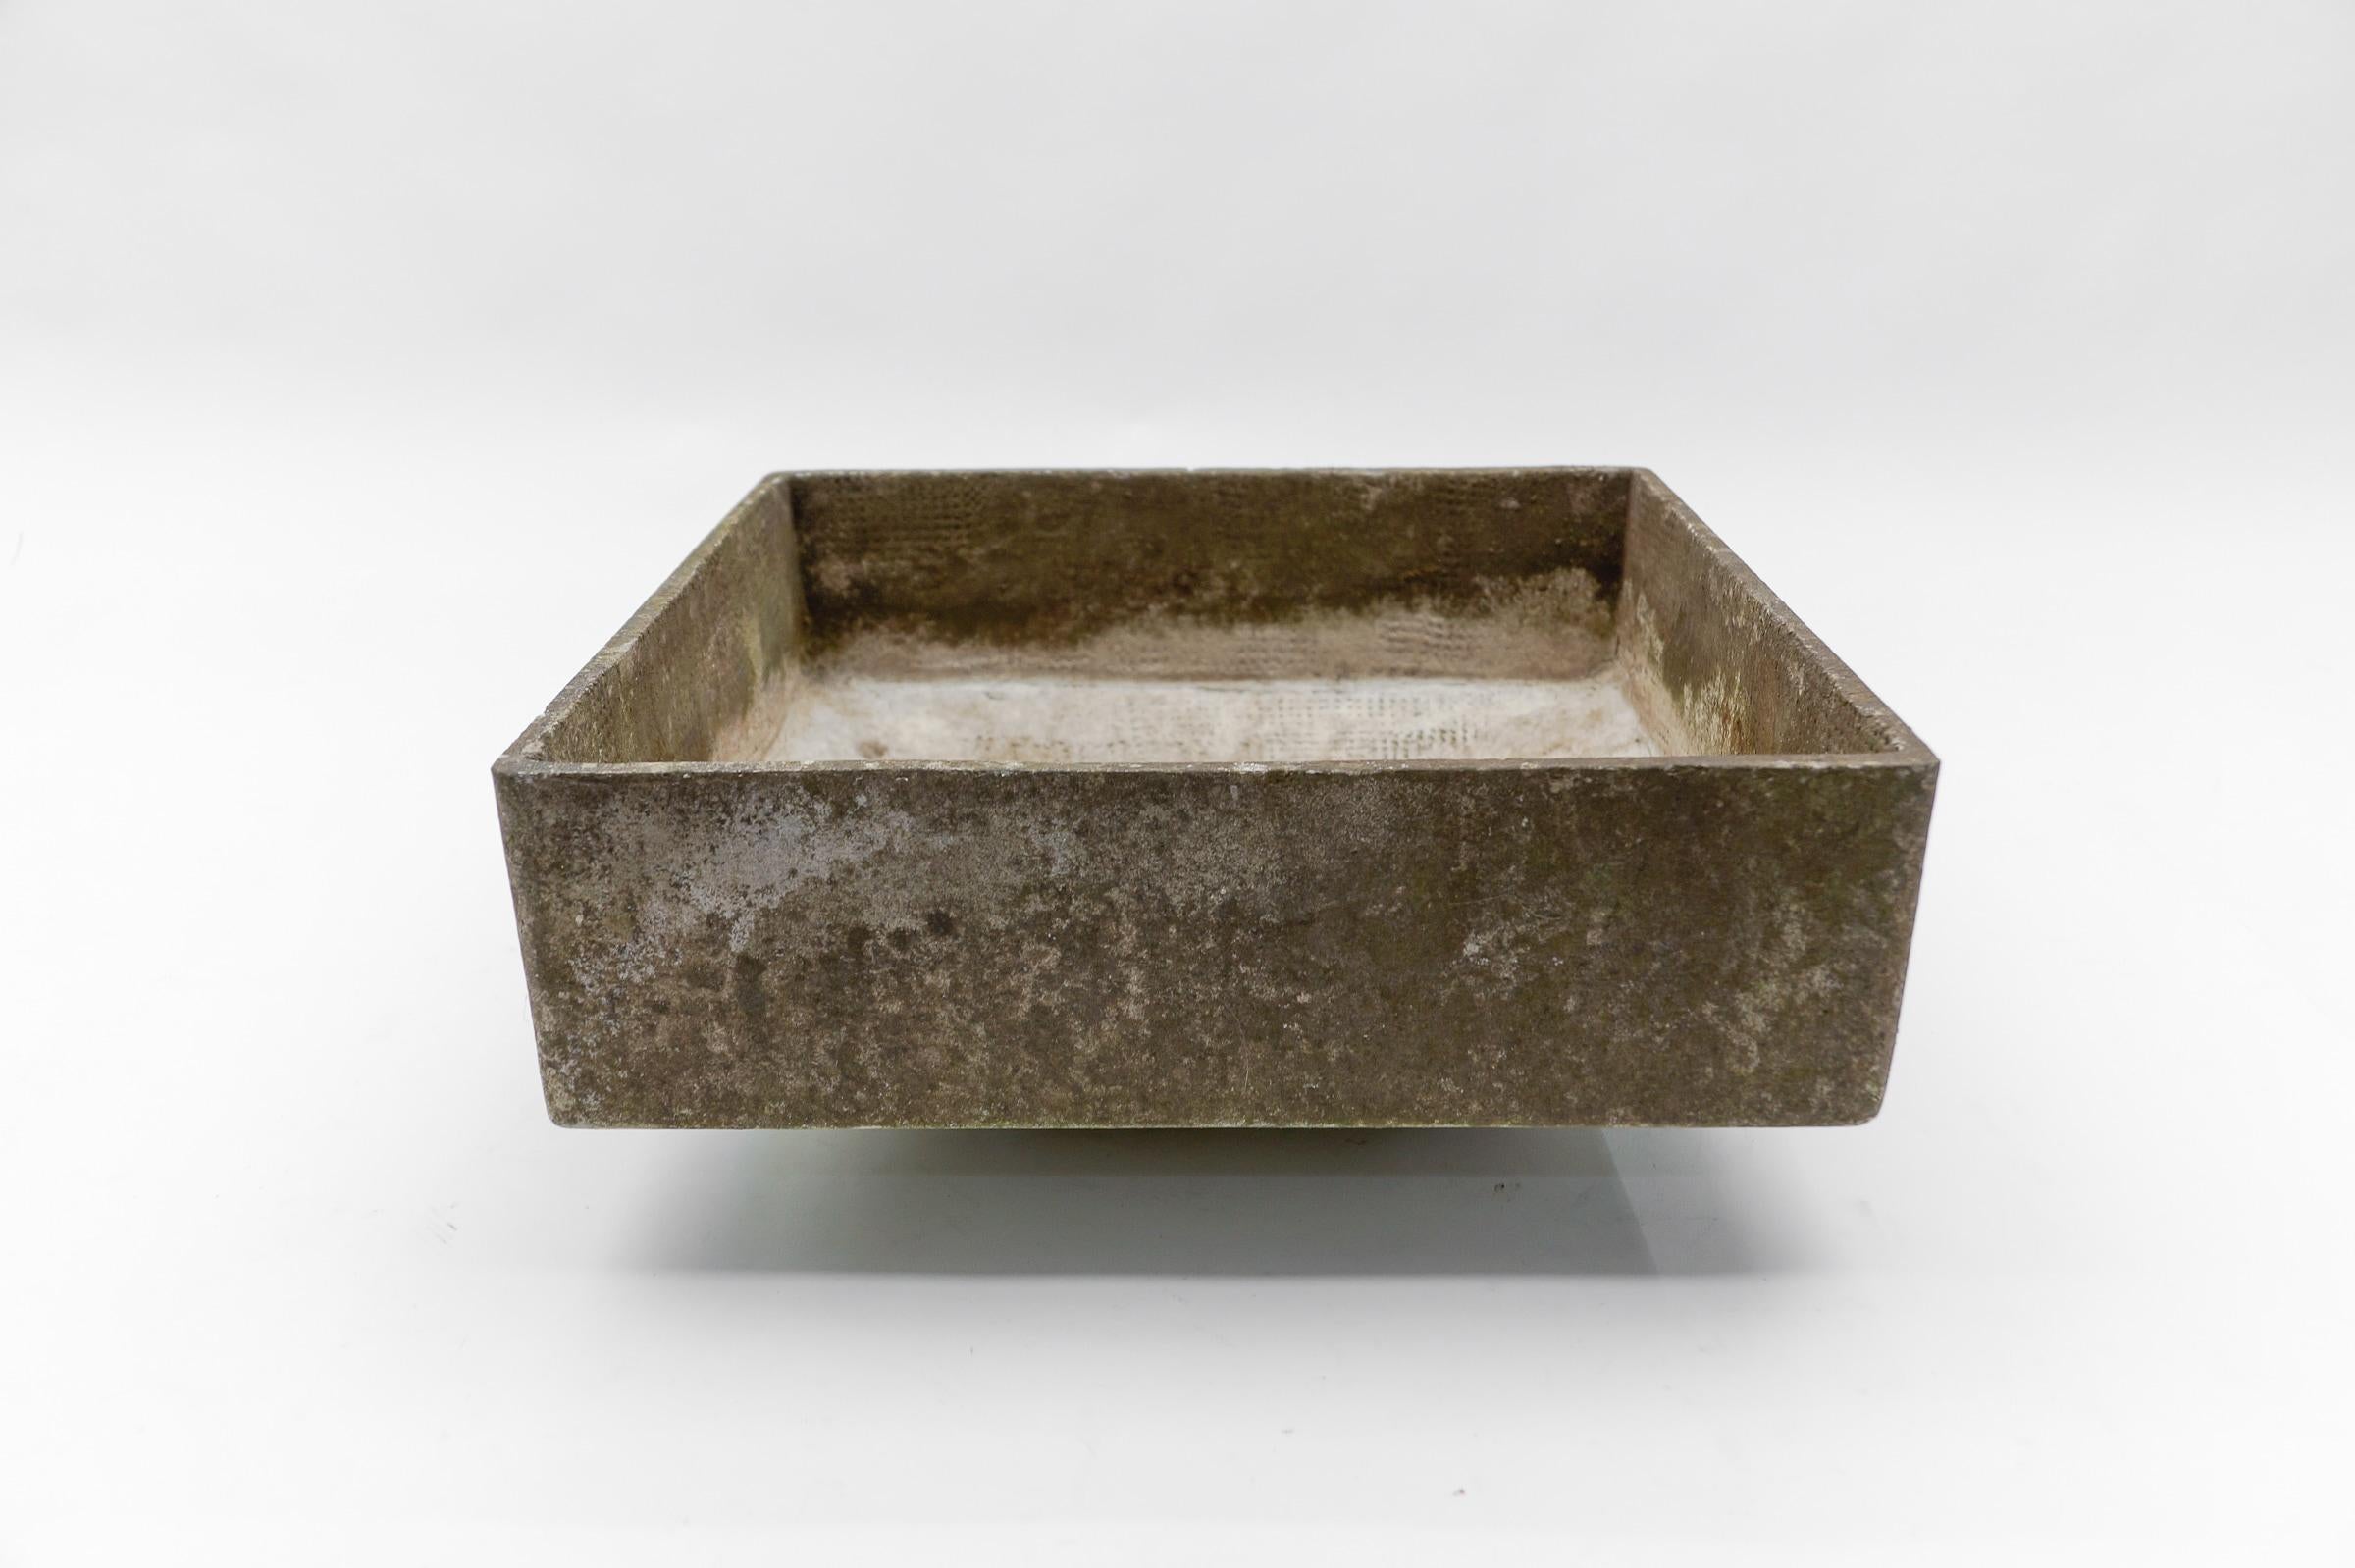 Very nice patina.

We have a total of six of the same type and many other models by Willy Guhl.

Swiss designer Willy Guhl (1915-2004) was well known for his weather resistant planter design for Eternit, besides being an innovative furniture,